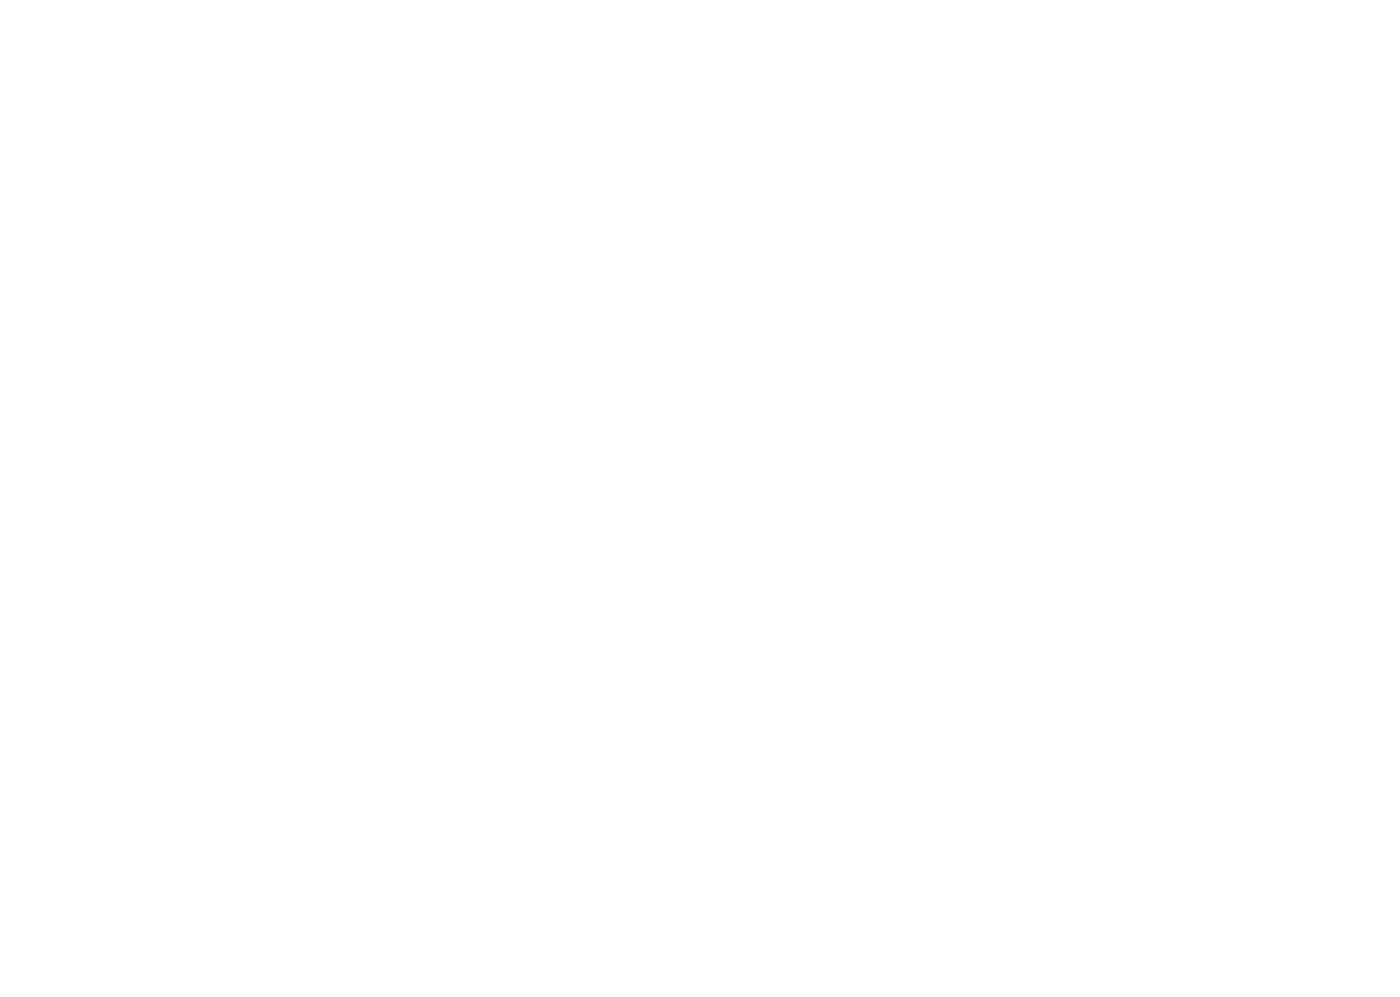 Roofcrafters